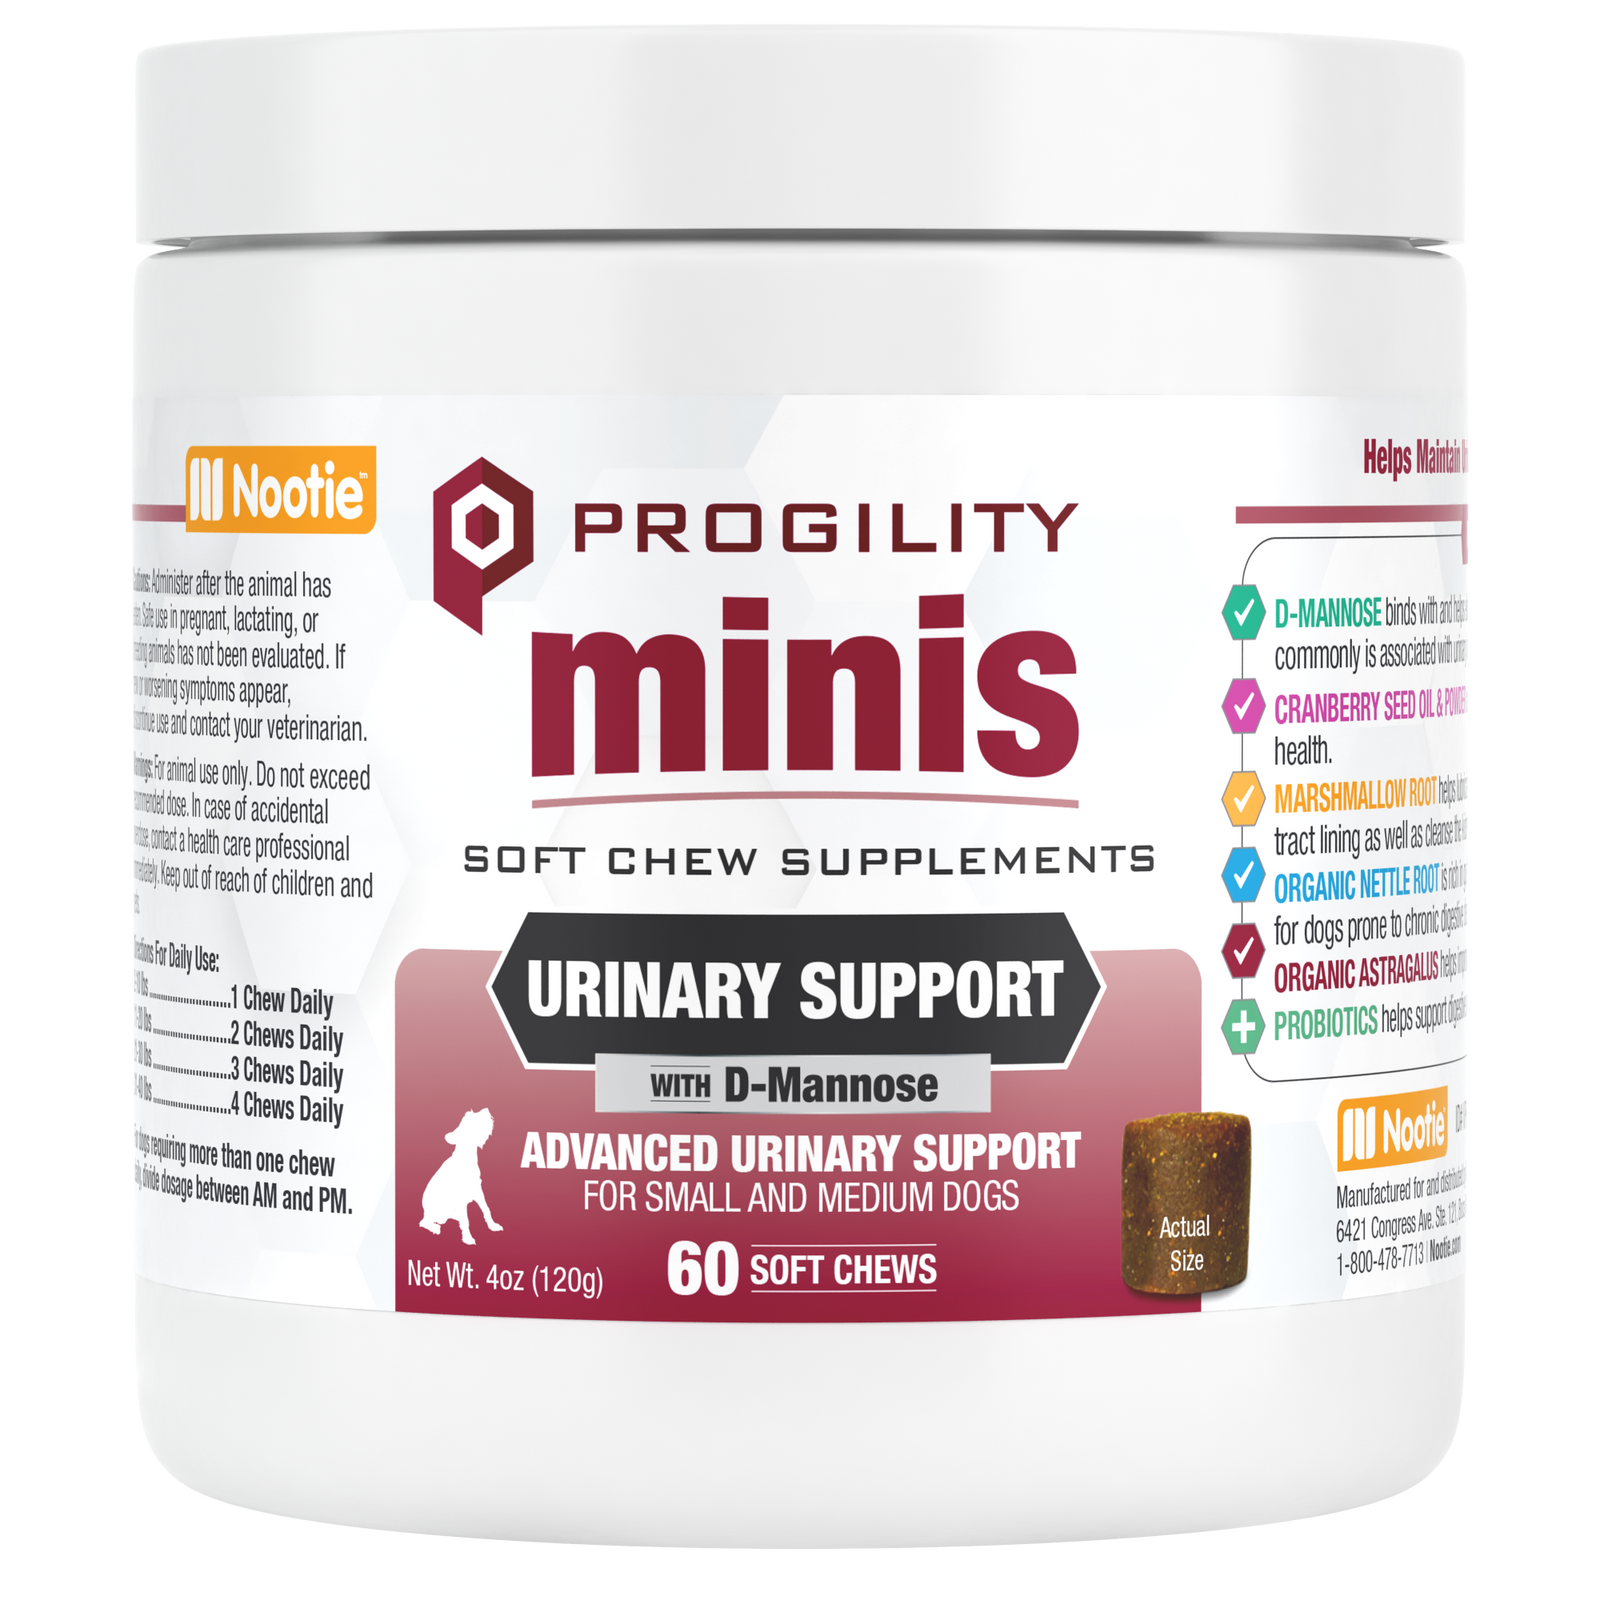 Progility Minis Urinary Support Soft Chew Supplement | For Small & Medium Size Dogs